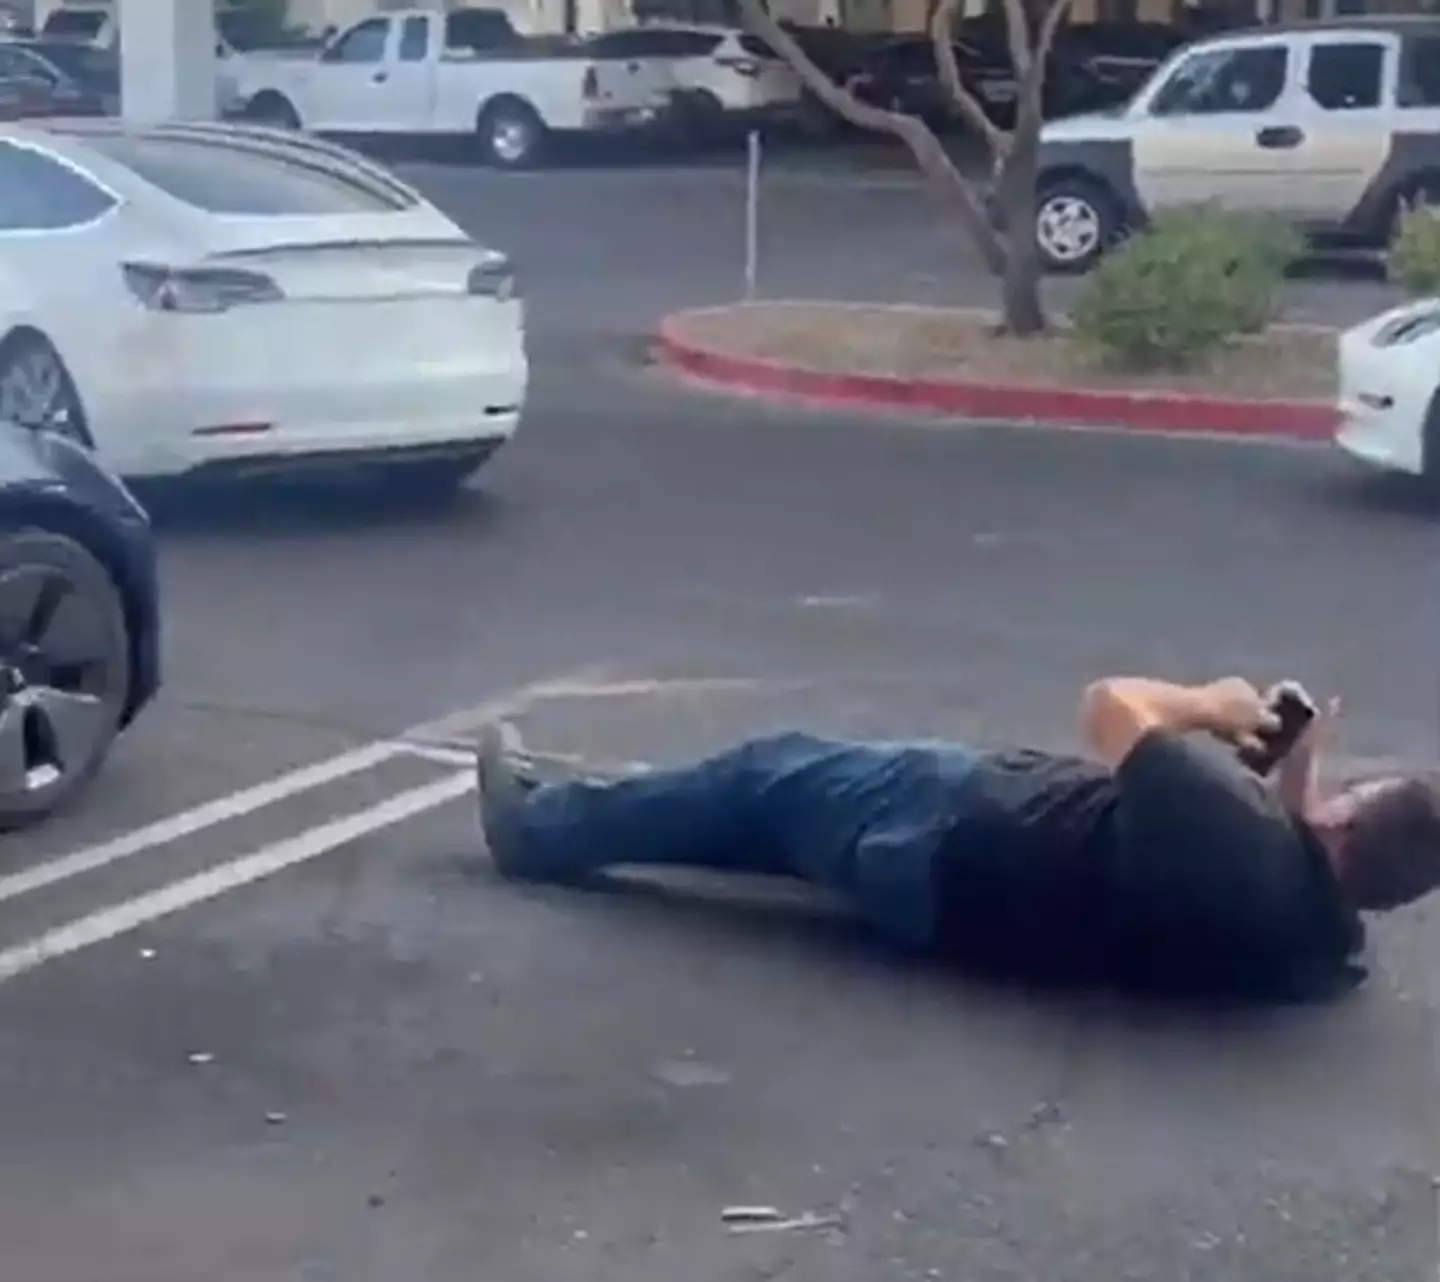 He stayed in the spot for 15 minutes until people helped him get his car on charge.